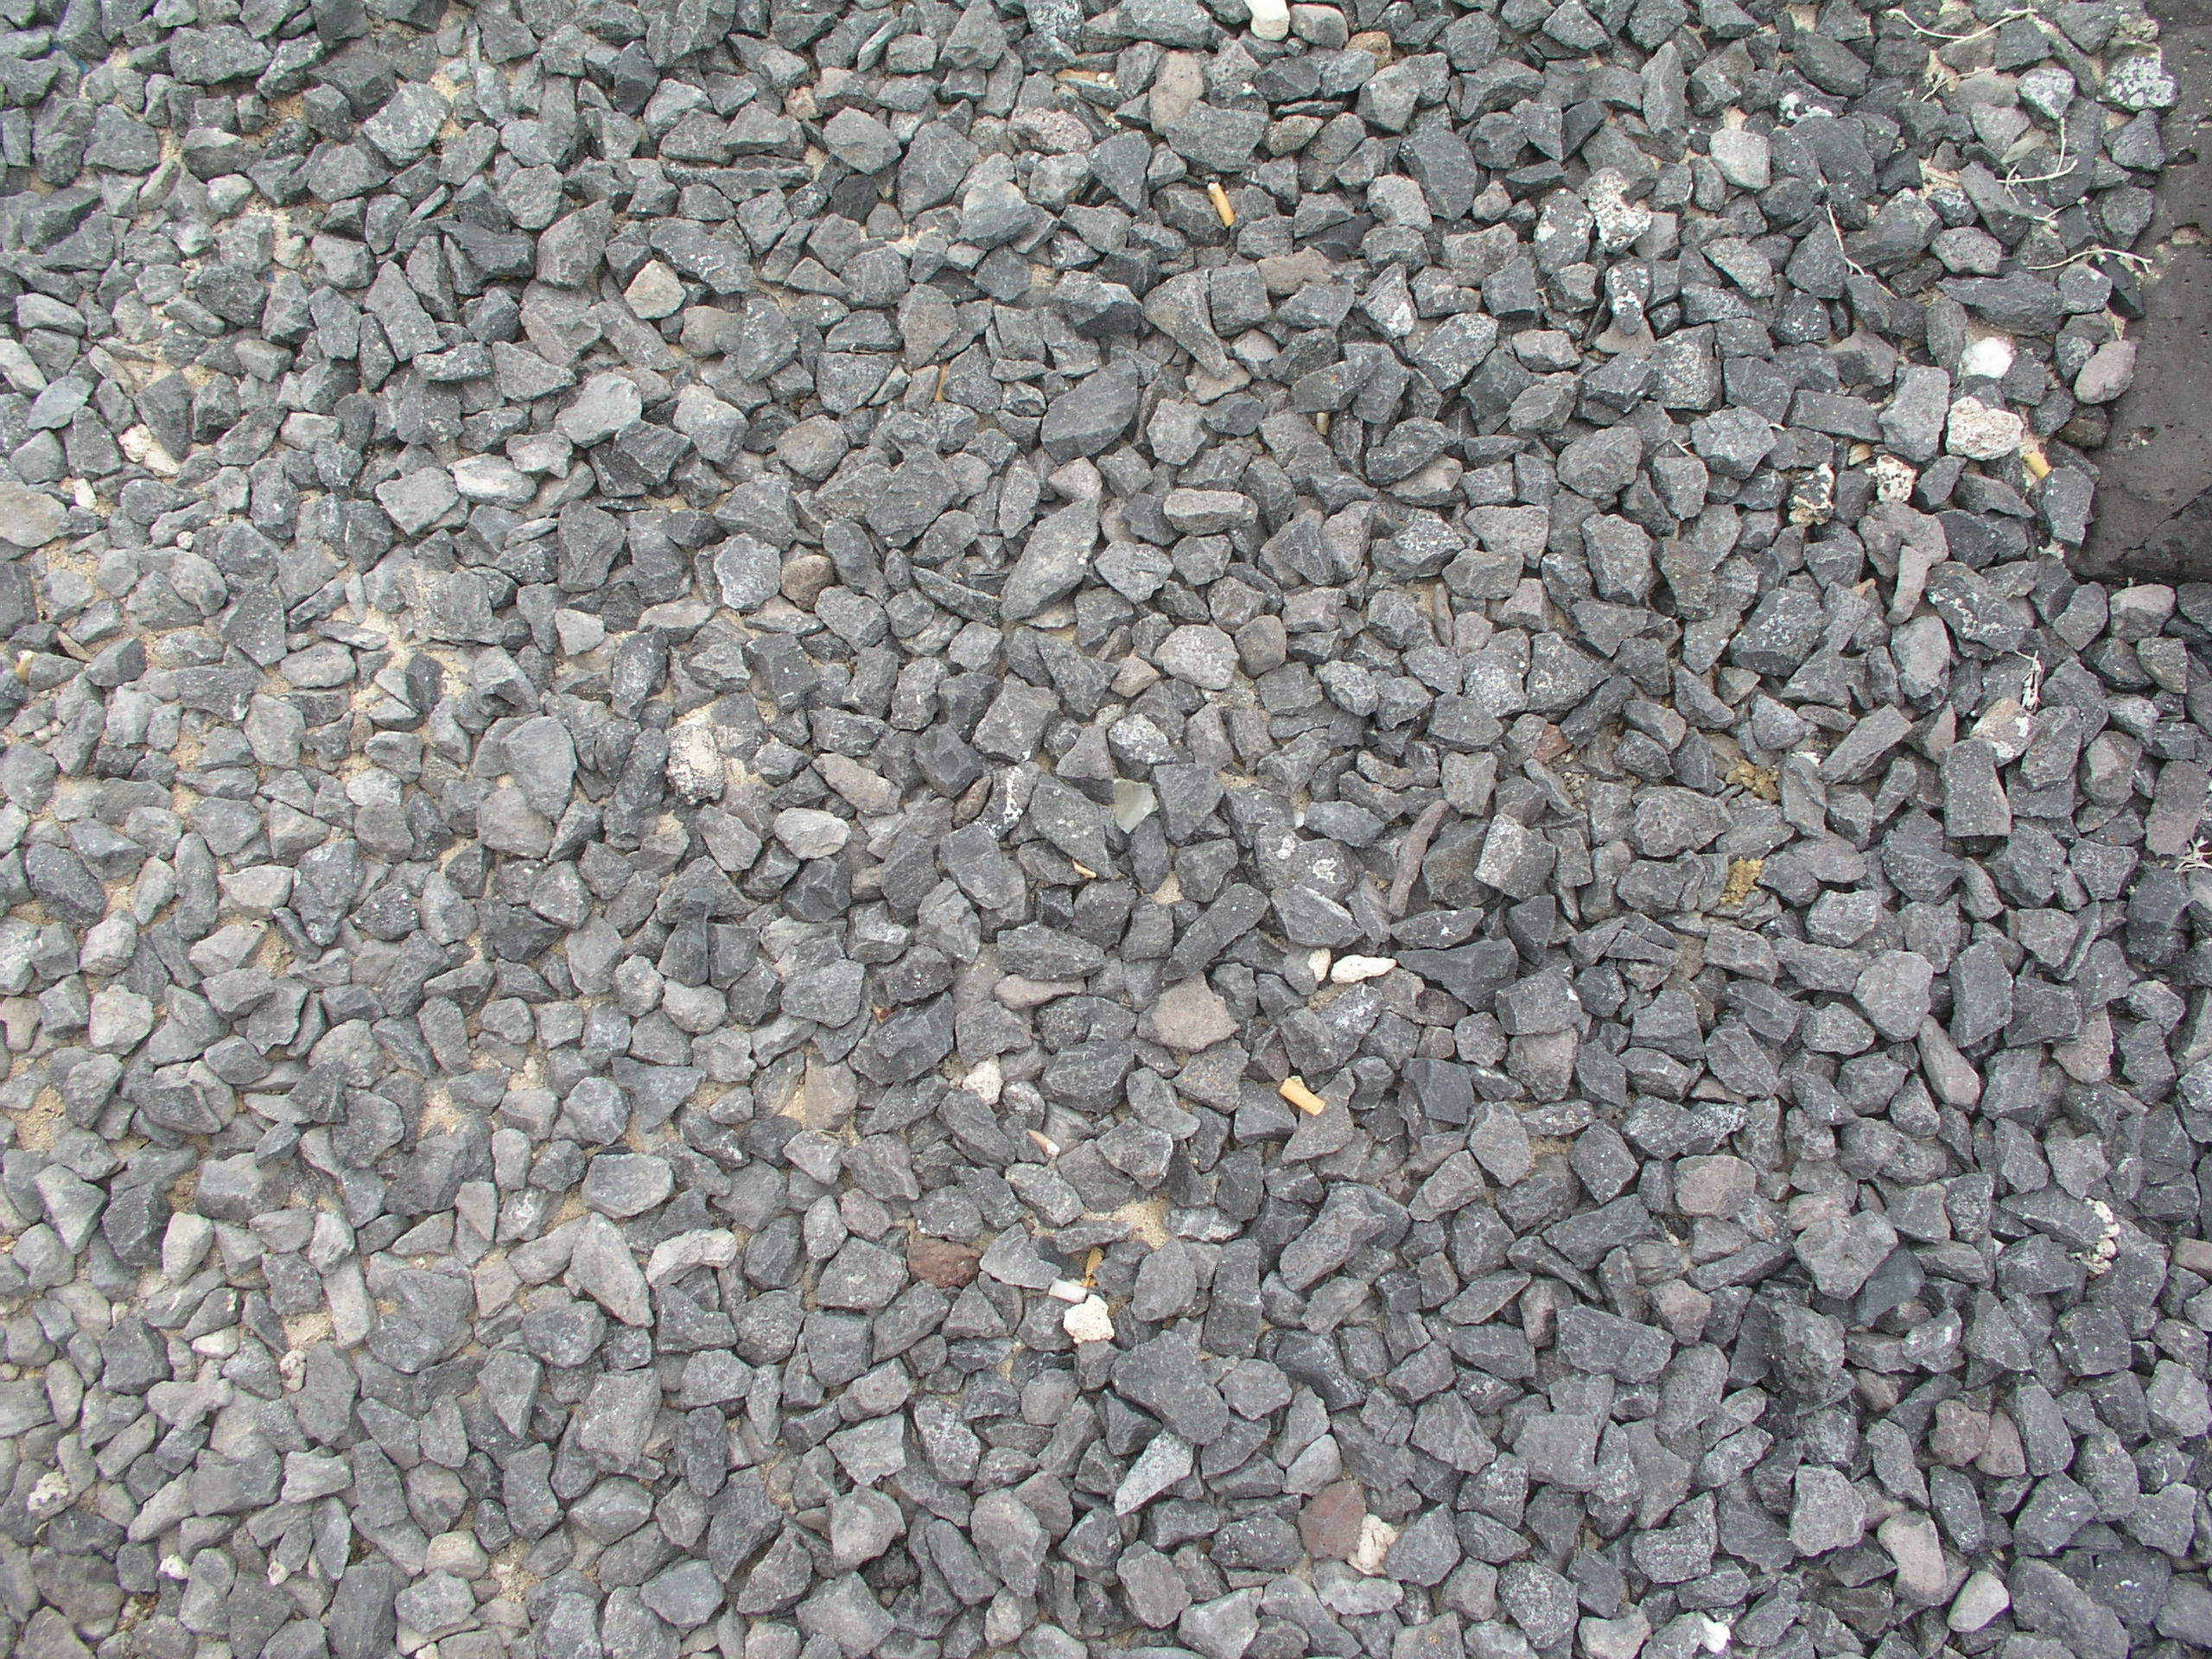 High Quality Tiny Gravel Textures - Gravel Textures | High Quality ...